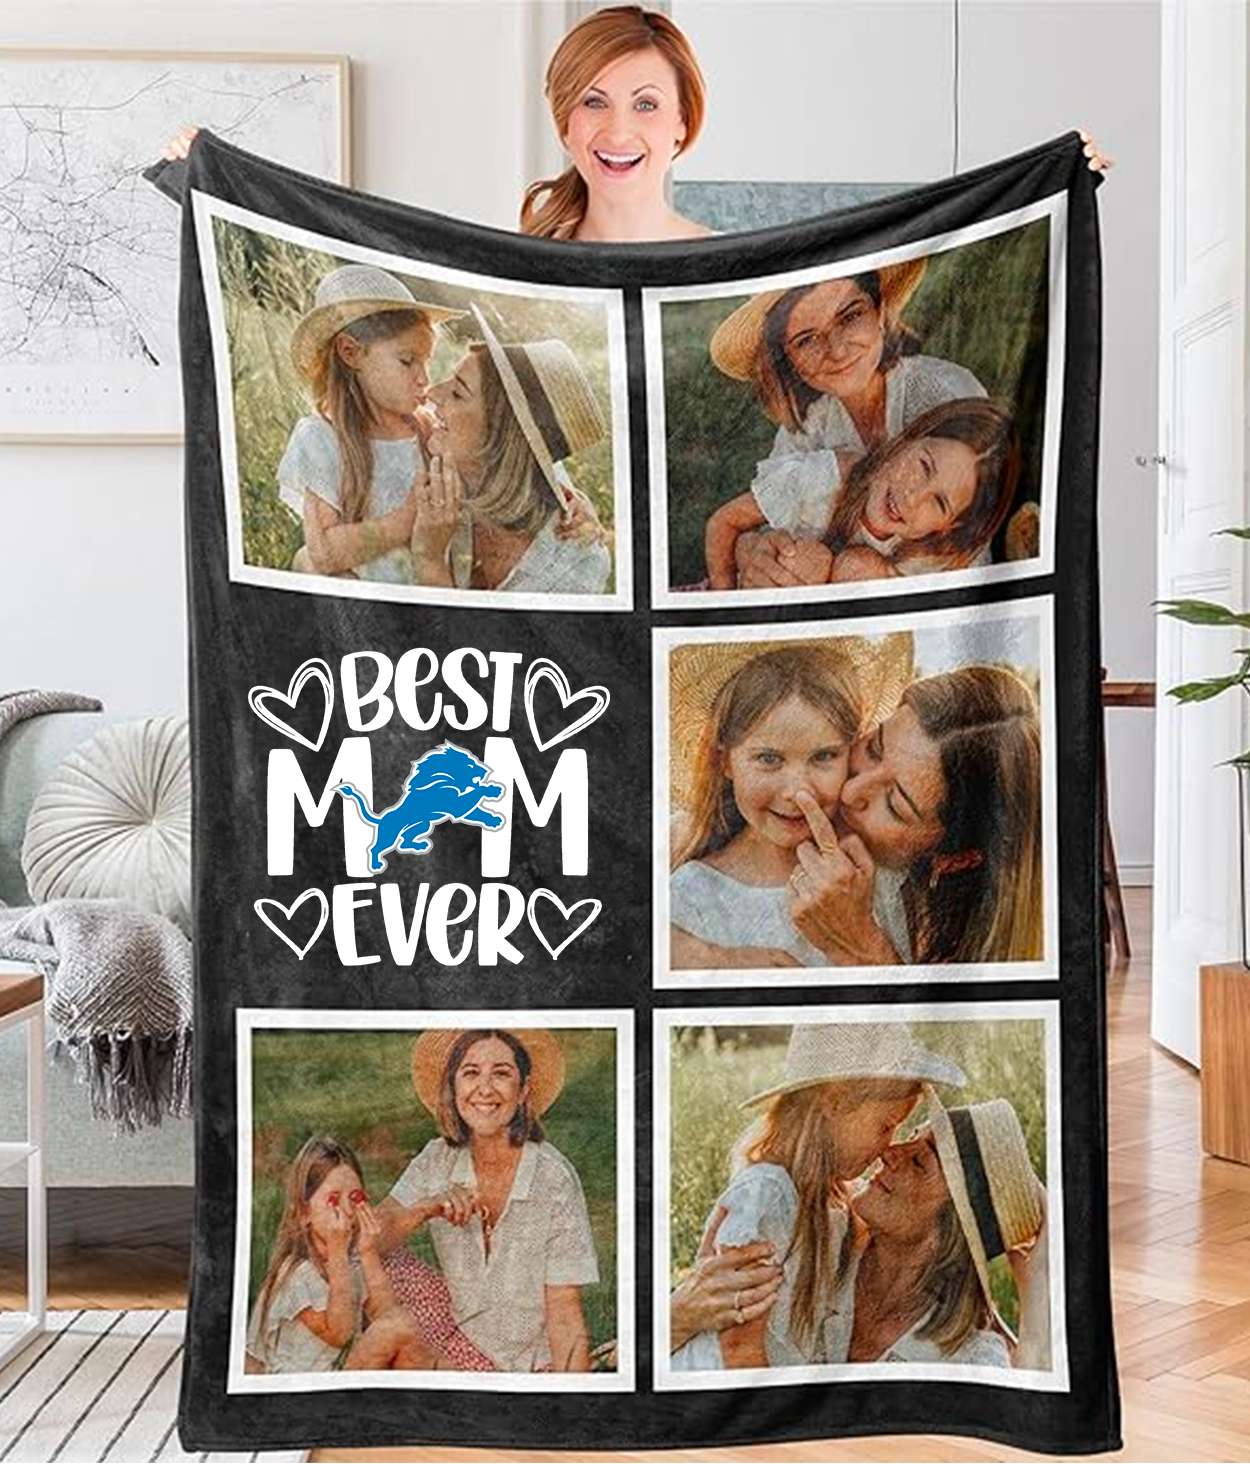 Best Mom Ever - Custom NFL Detroit Lions Blankets with Pictures for Mother's Day Gift